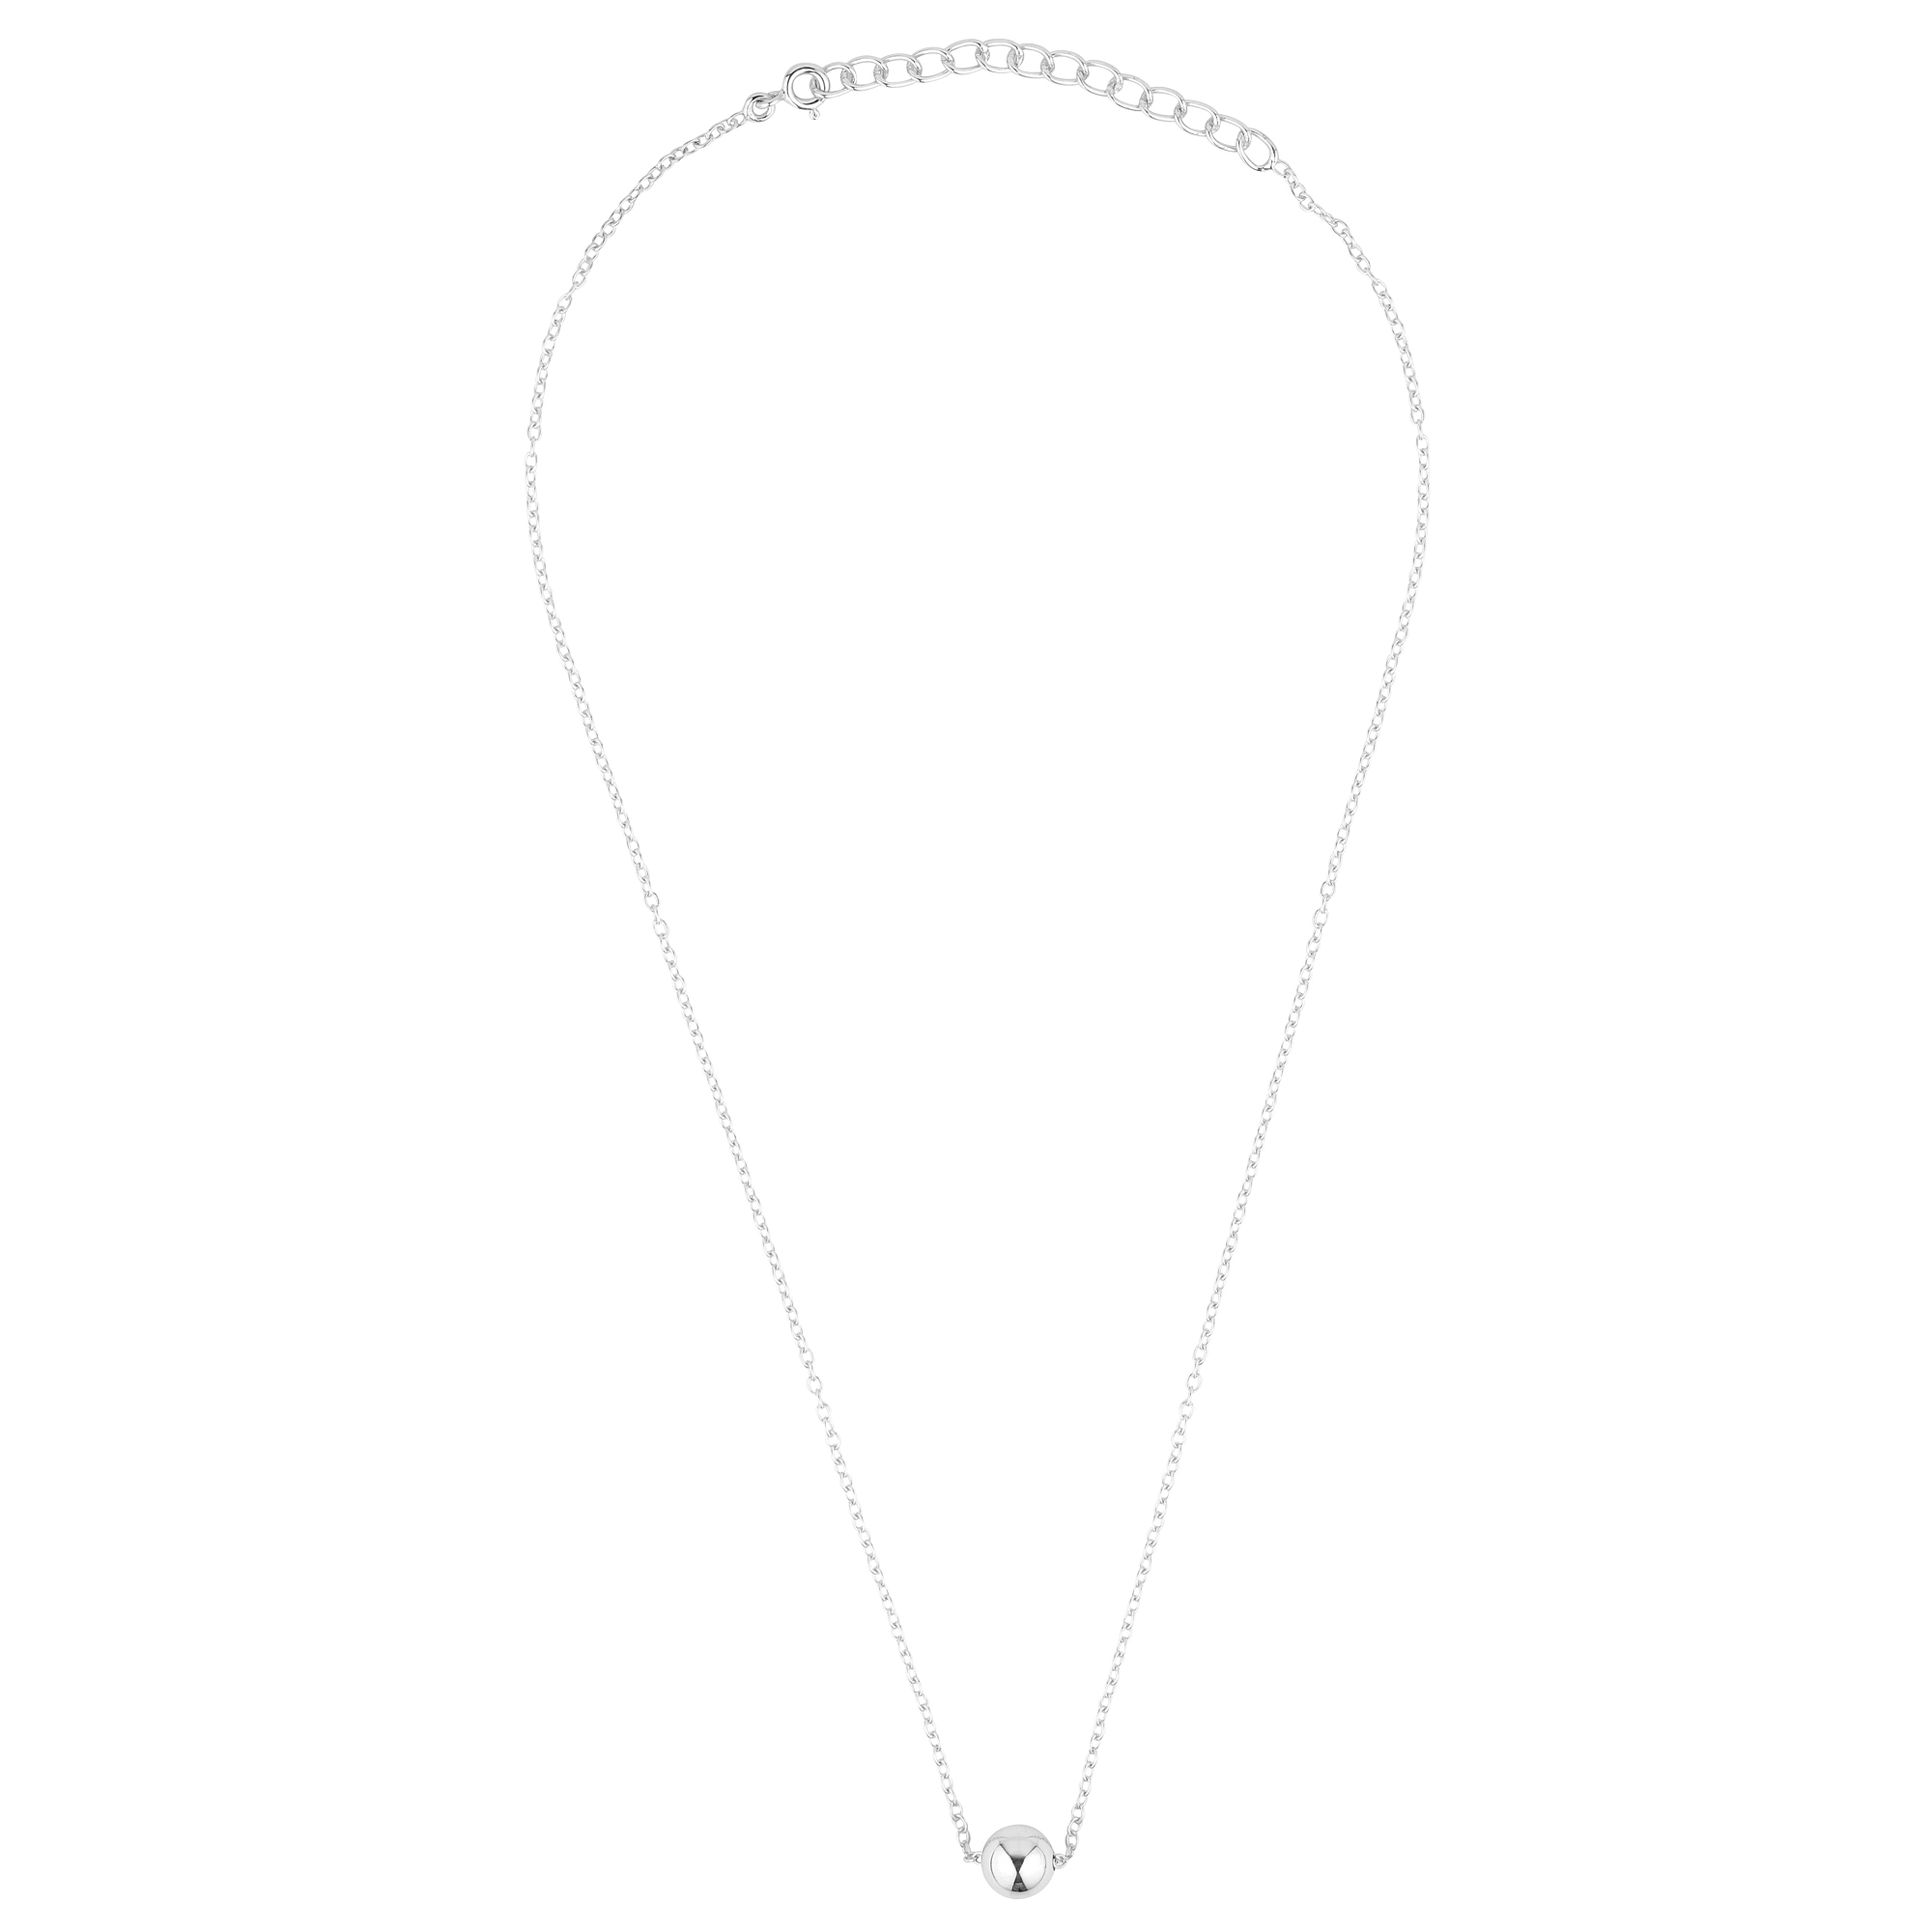 8mm Ball necklace in 925 sterling silver